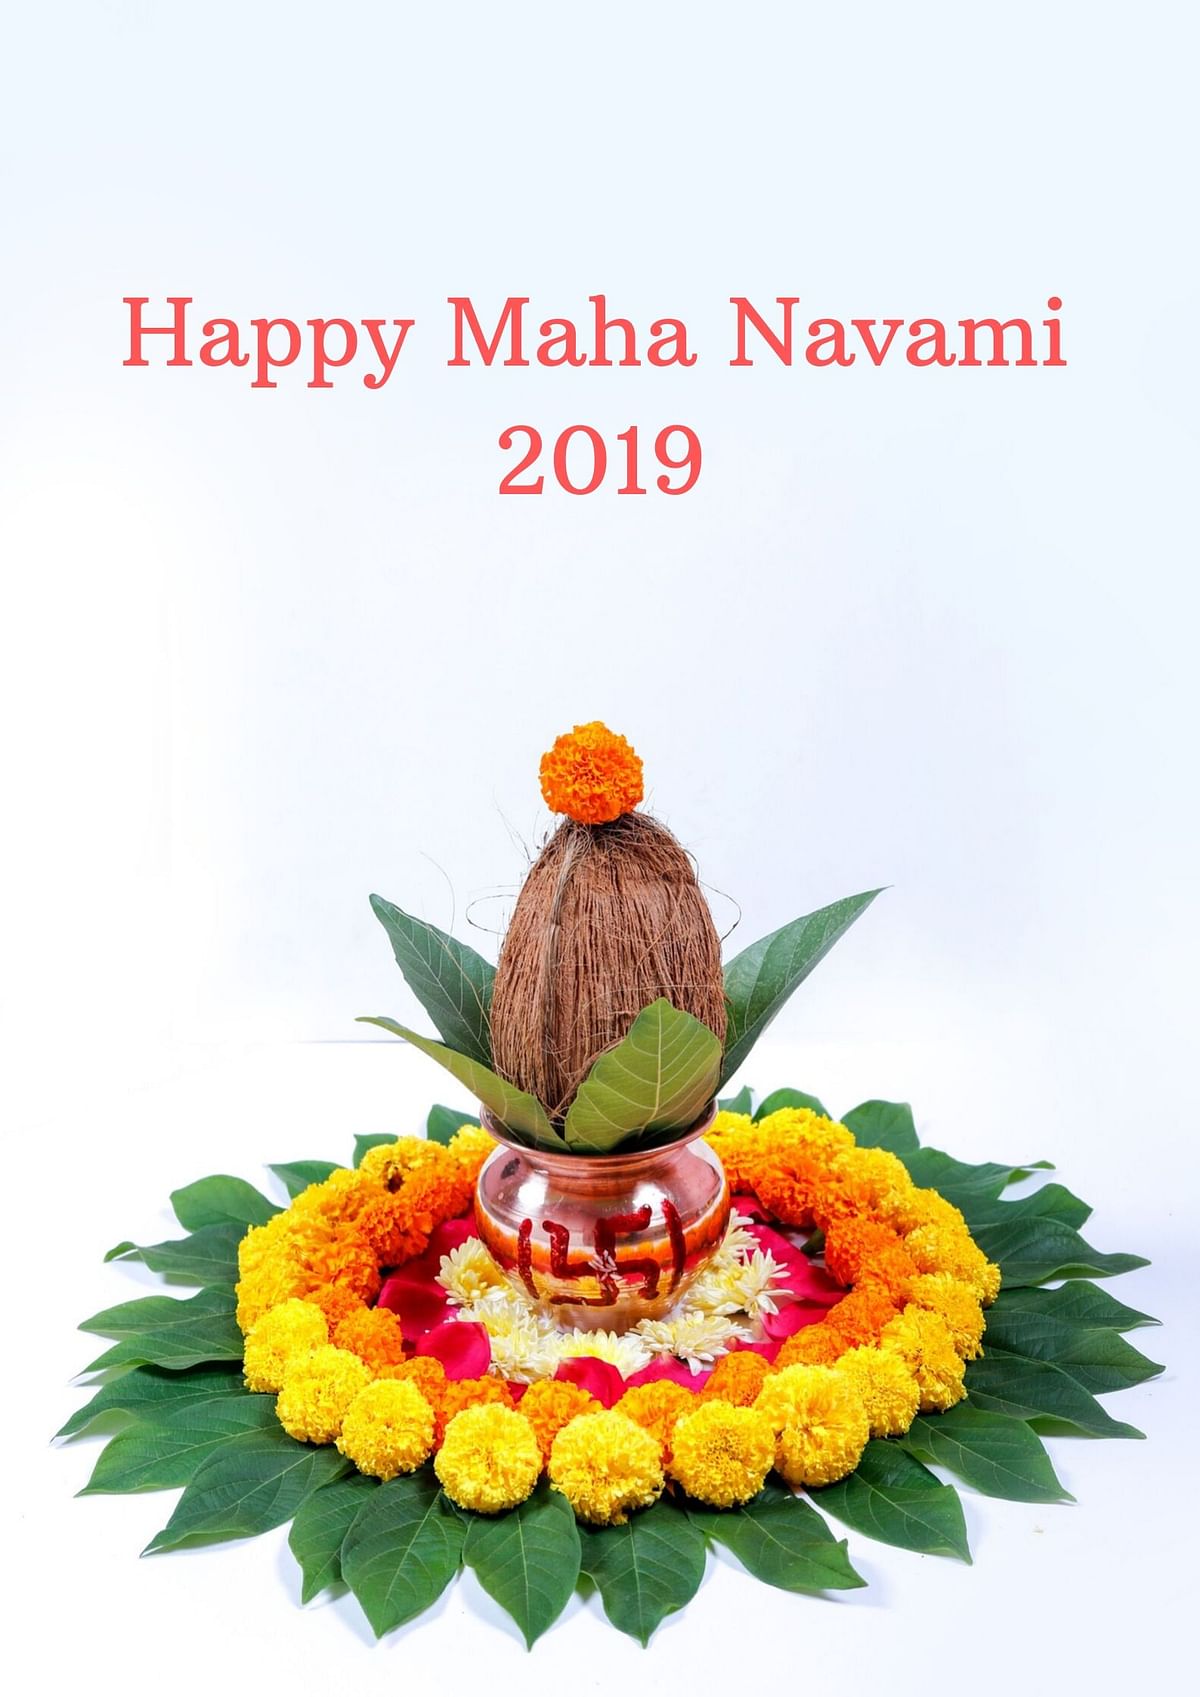 Everything you want to know about Maha Navami 2019.